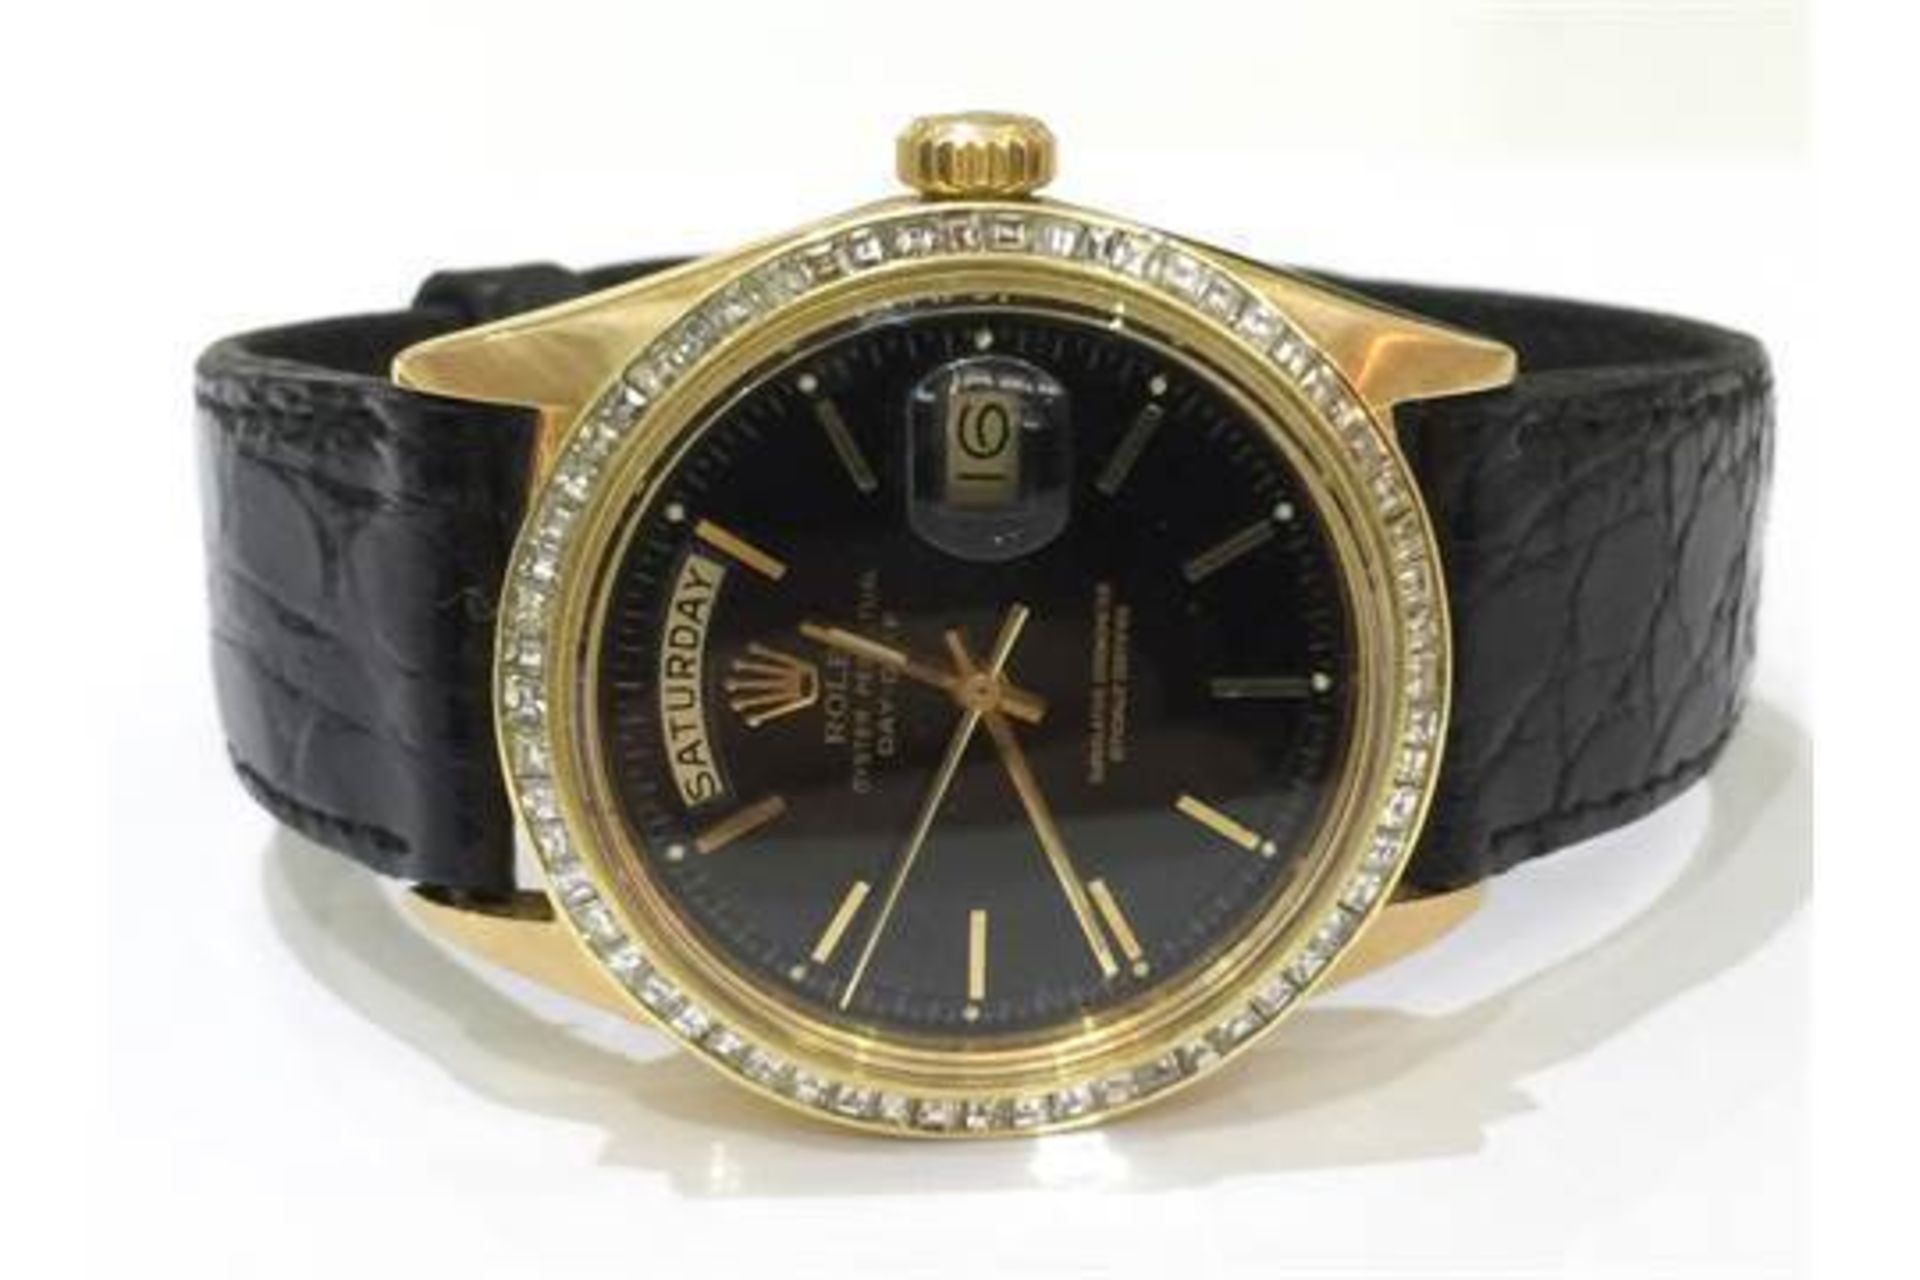 GENTS 18CT ROLEX DAY DATE WITH BLACK FACE AND NUMERALS, SET WITH A 2CT PRINCESS CUT DIAMOND BEZEL,